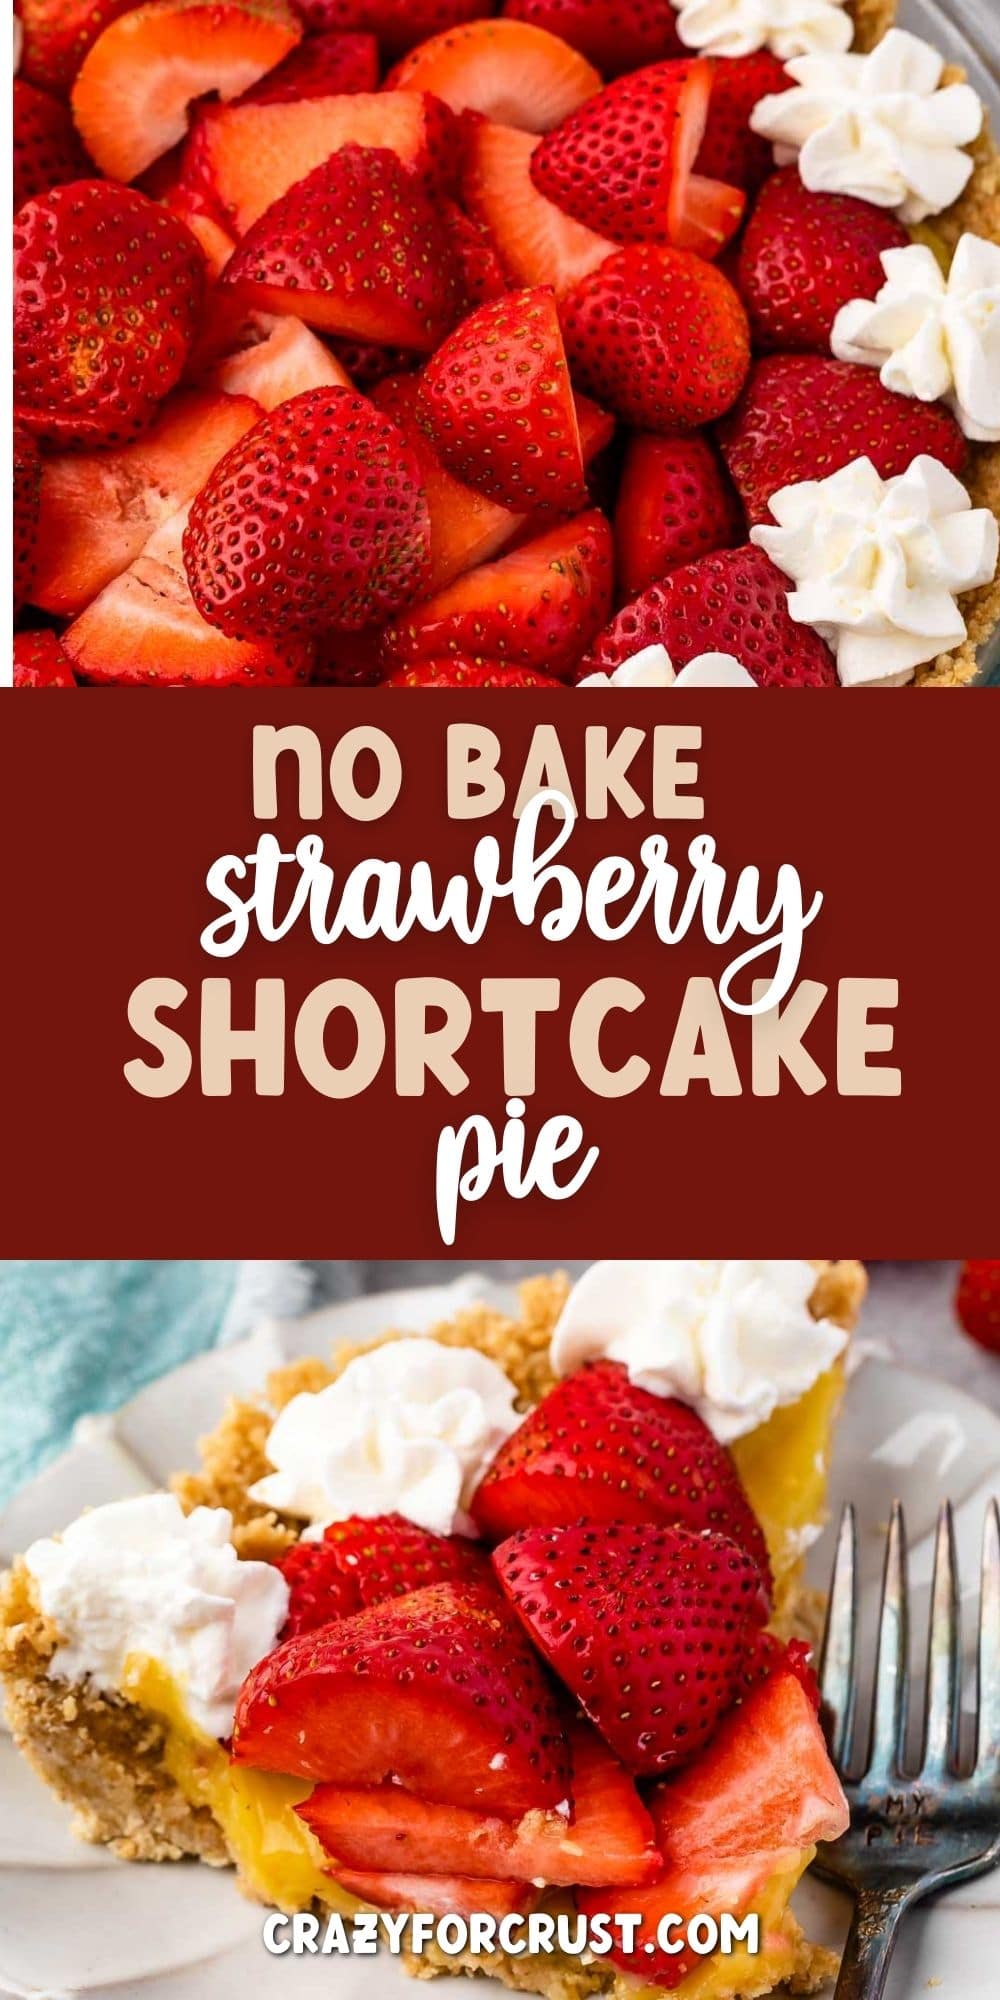 No bake strawberry shortcake pie collage with recipe title in between two photos